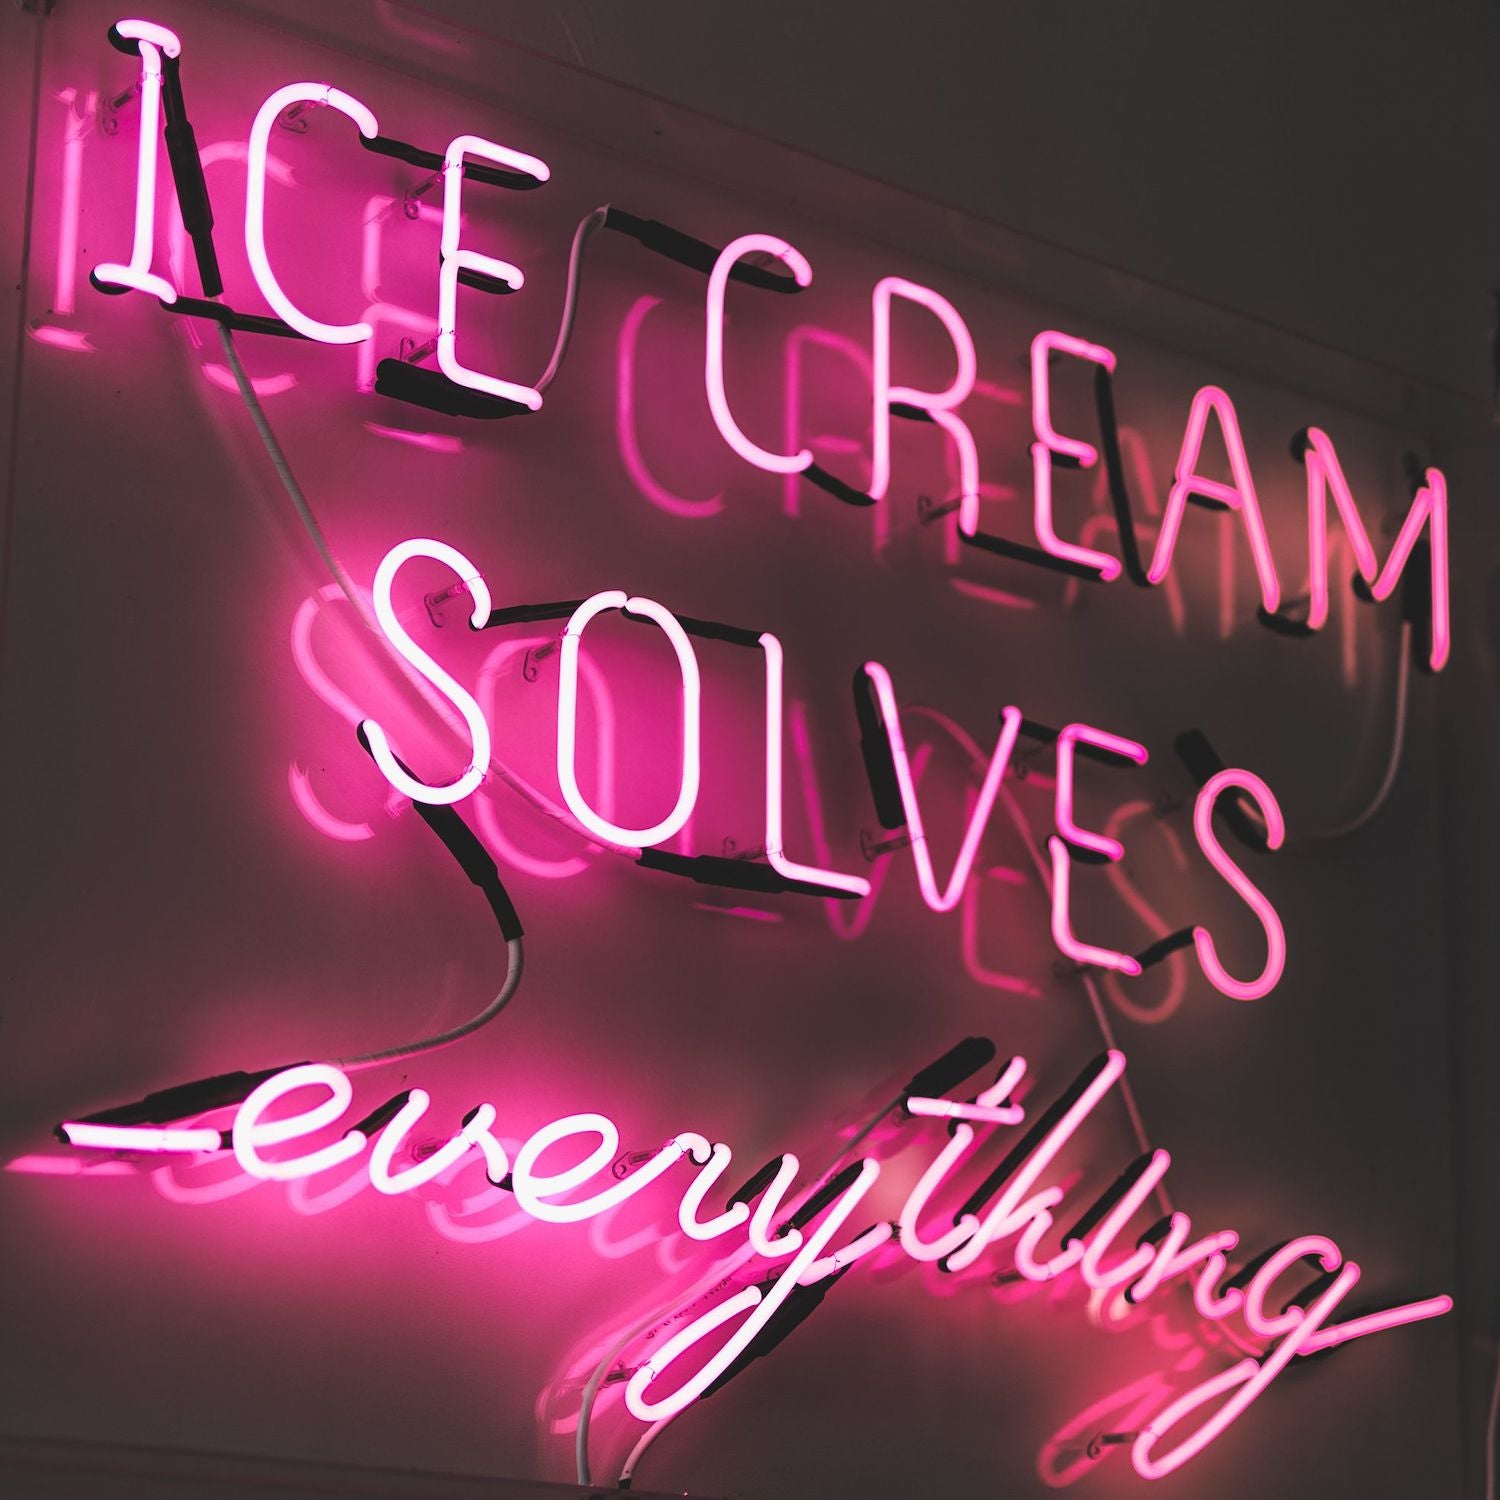 Ice cream solves everything neon sign